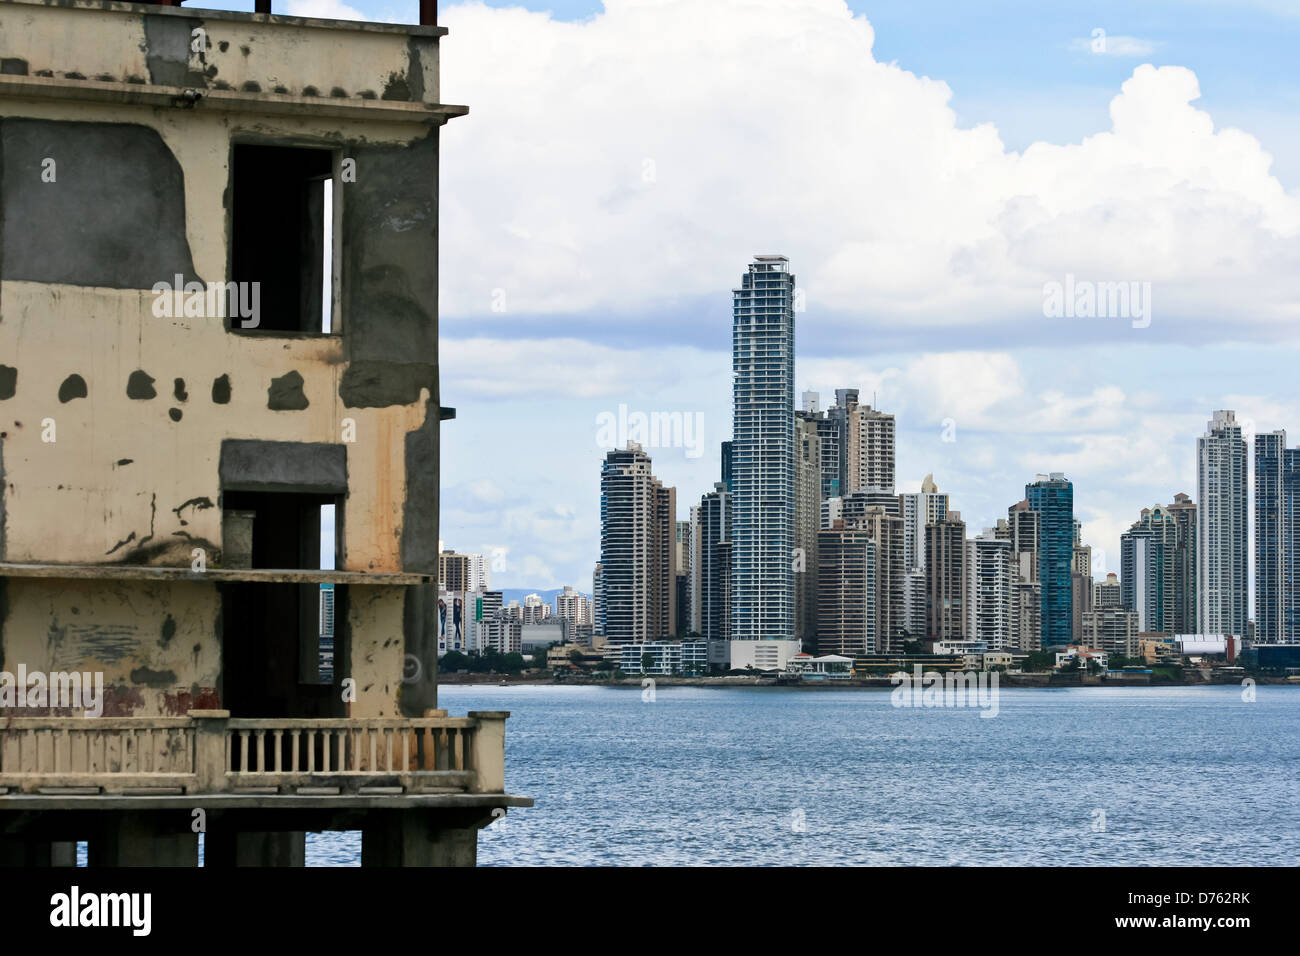 View of spanish colonial archetecture and the new buildings, Casco Viejo District, Panama City Stock Photo